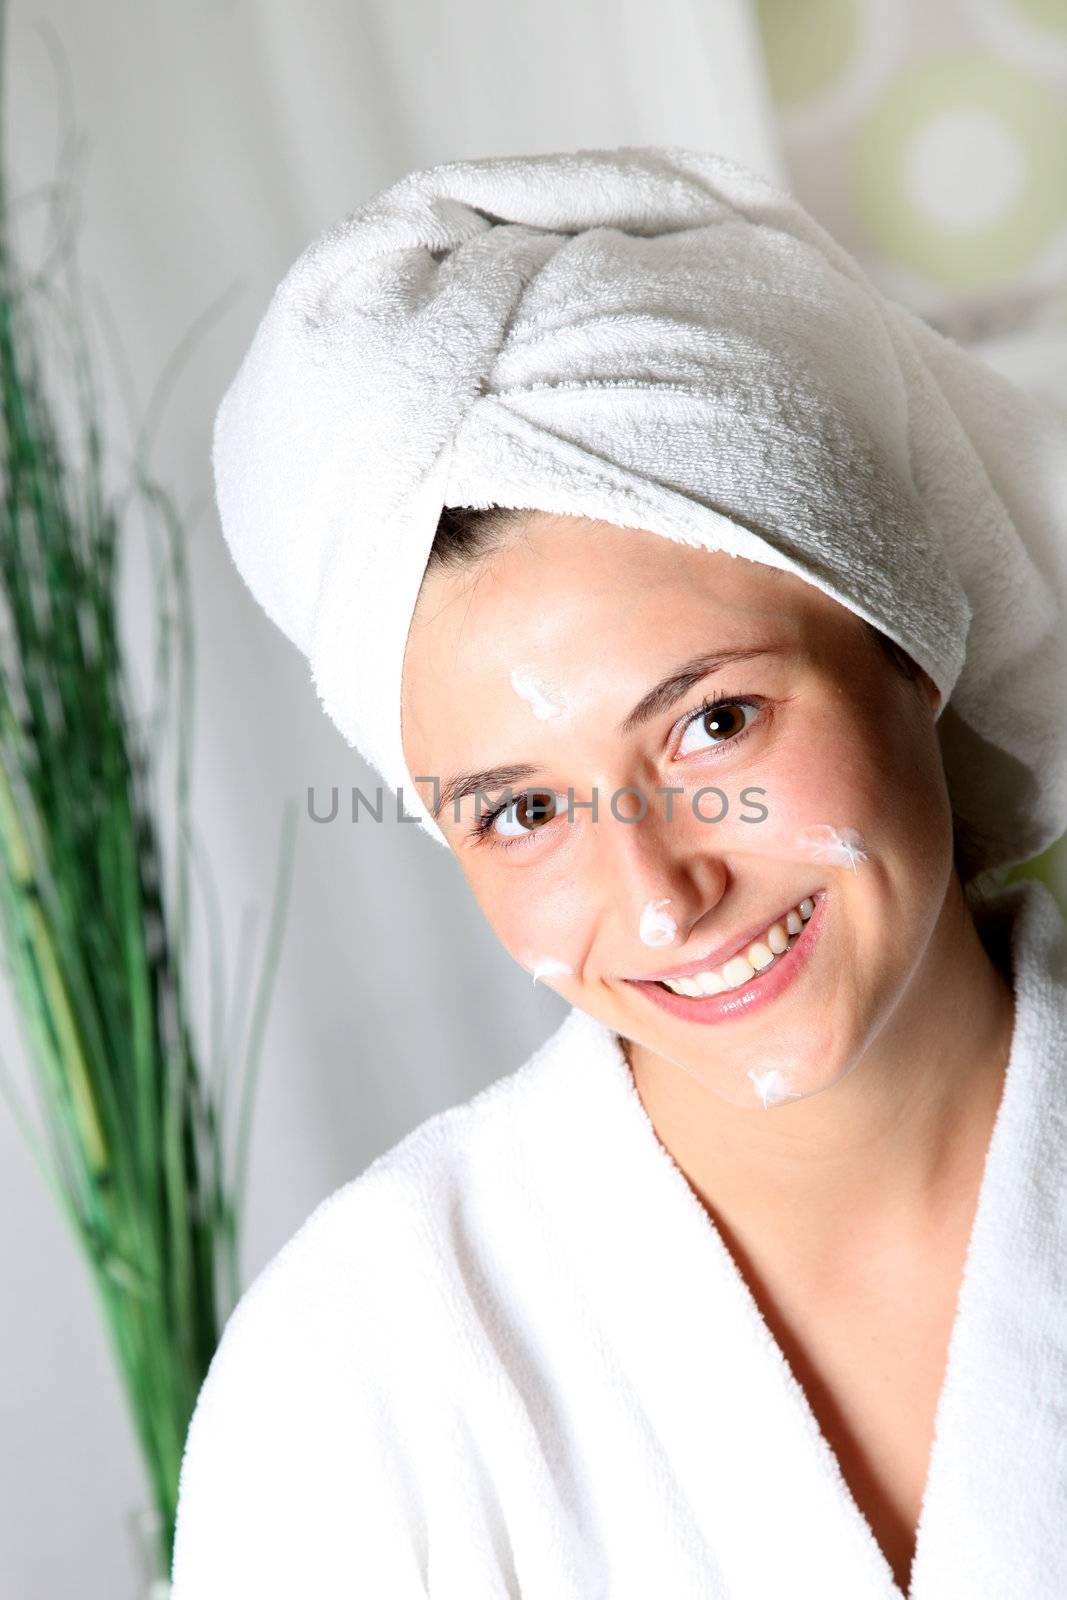 Smiling young woman with cream on her face relaxed. She wears a towel on his head and a bathrobe

